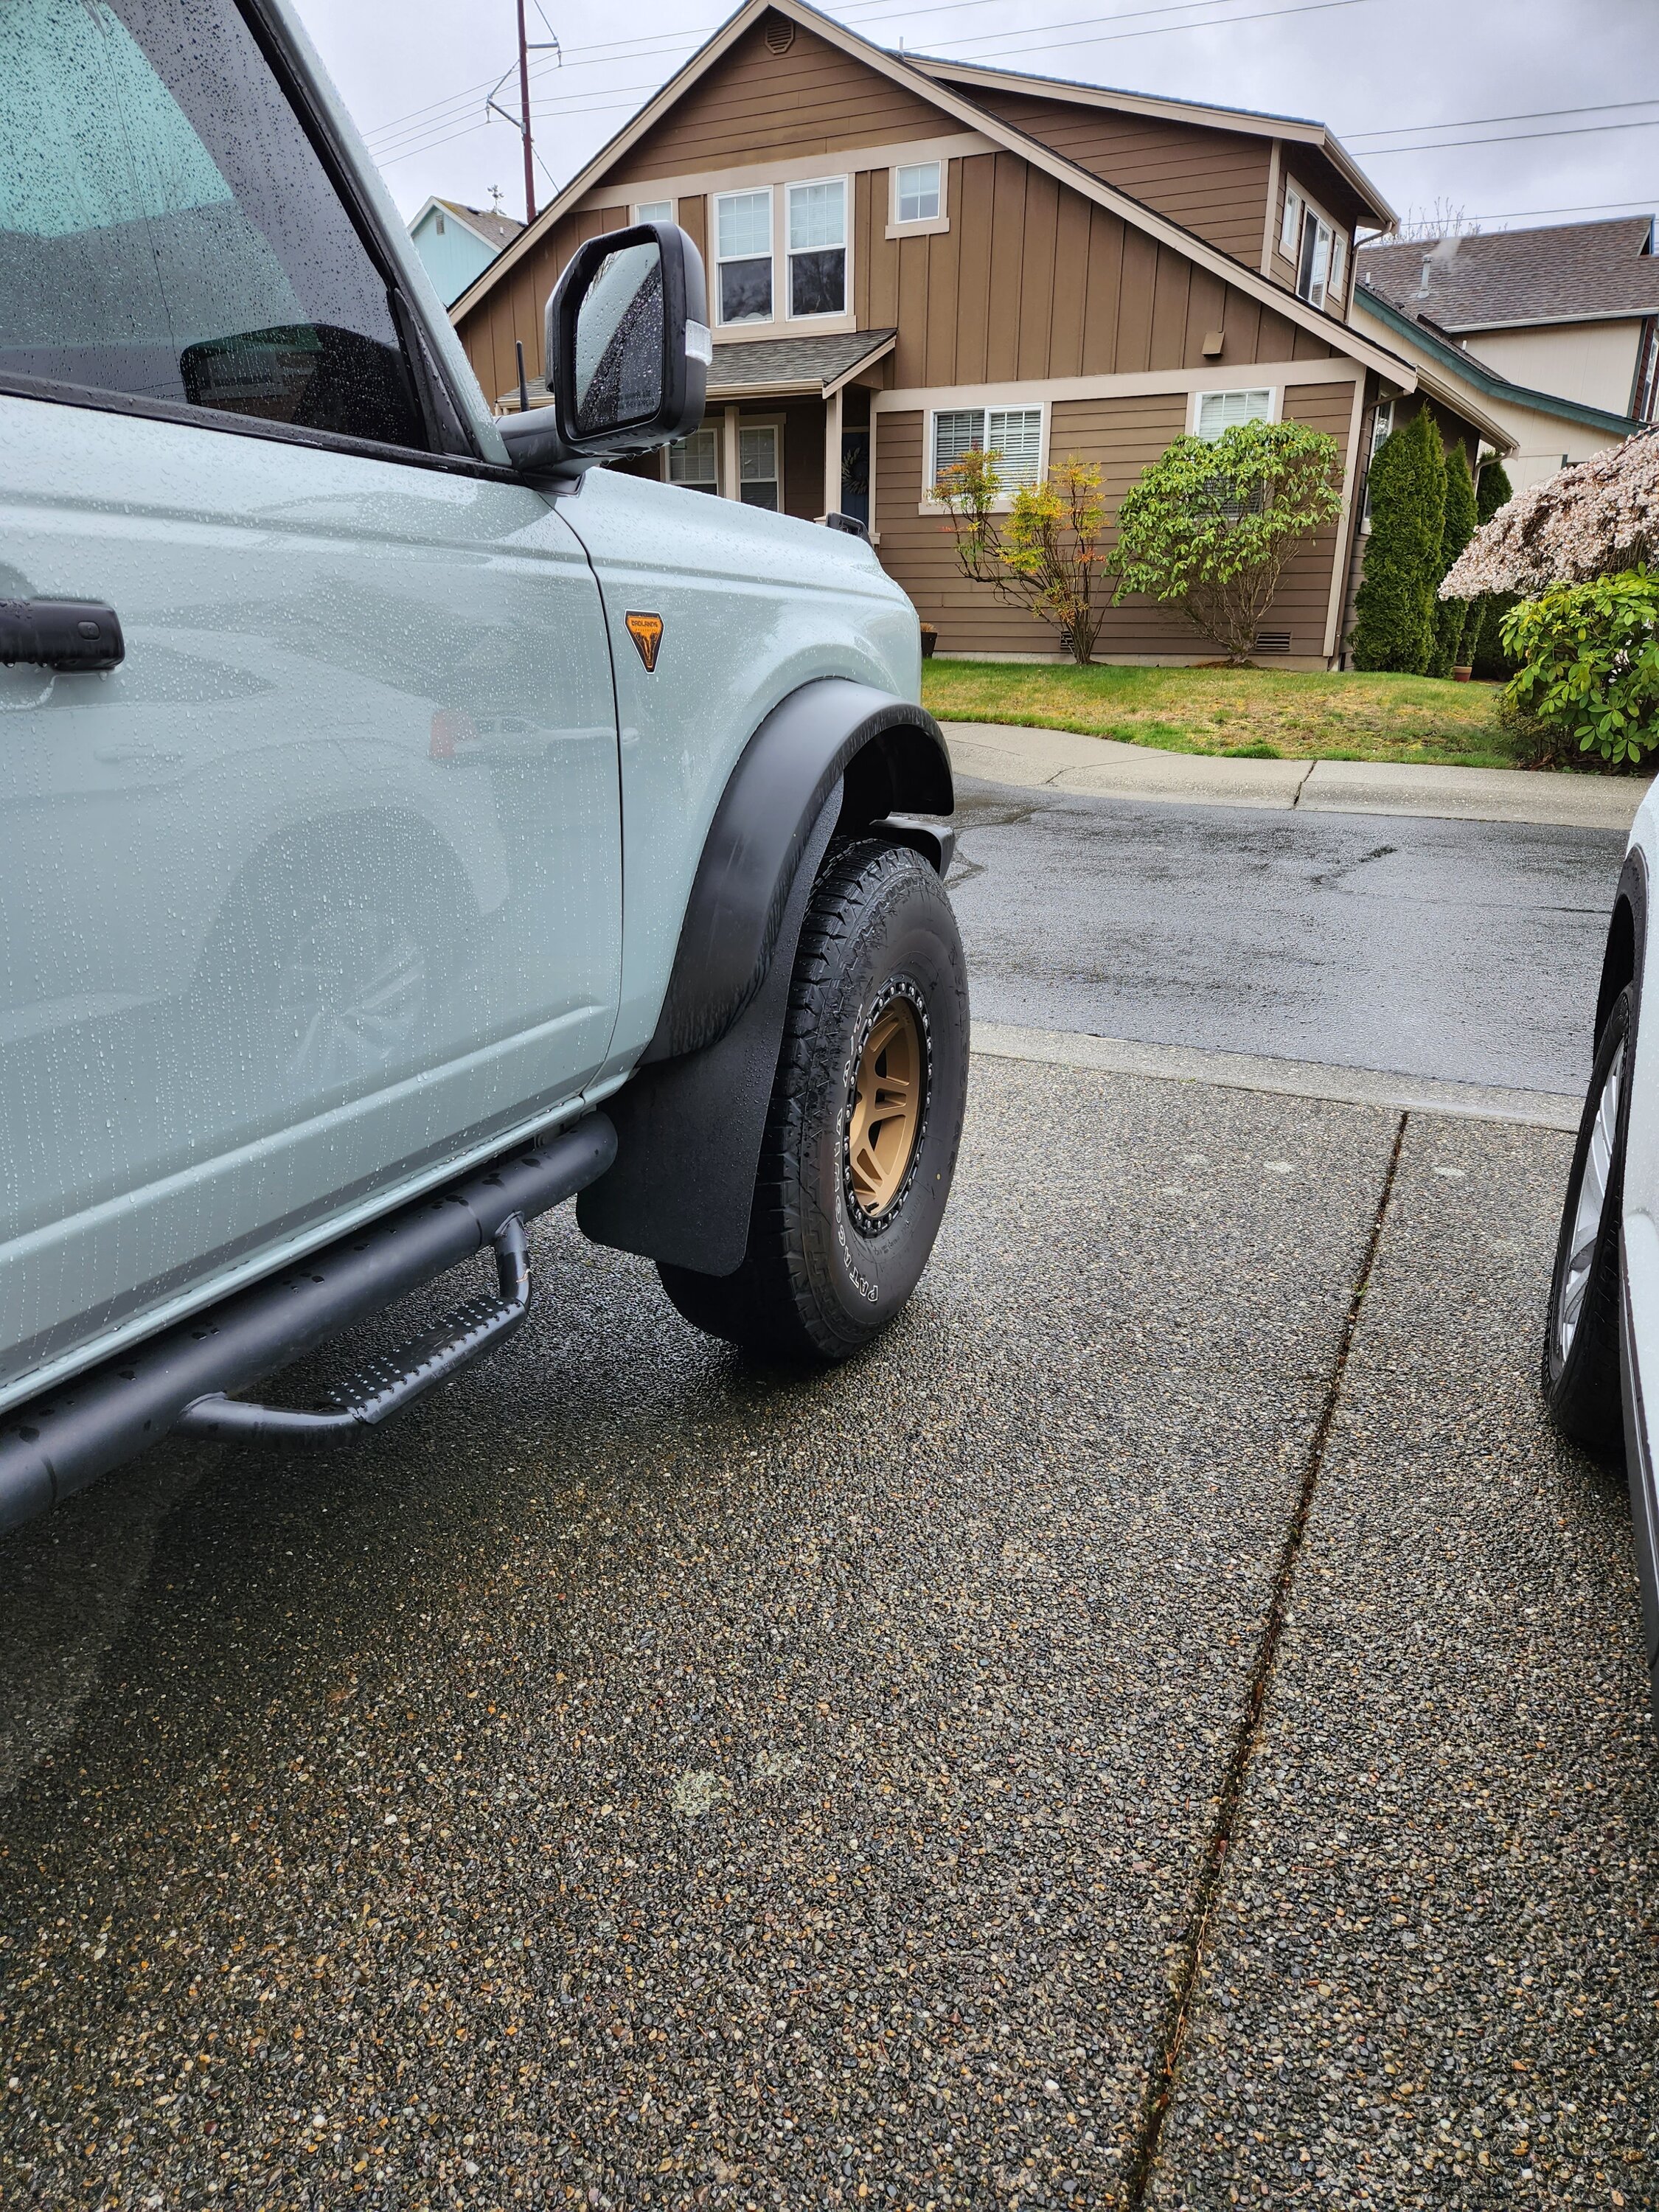 Ford Bronco Best mud flaps for a Sasquatch? 20230331_173106